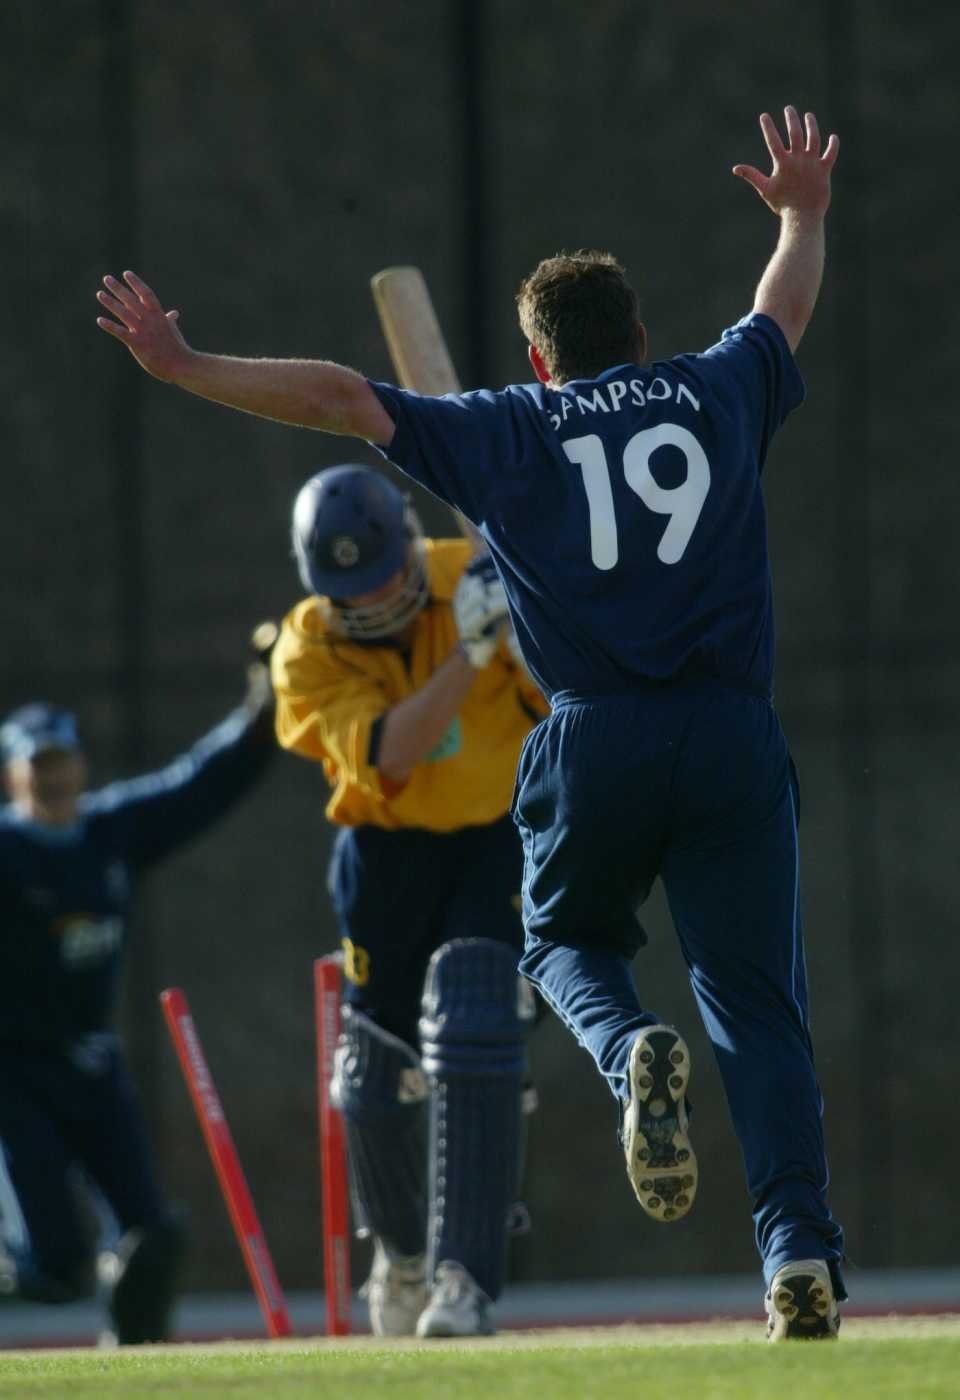 Shane Watson is bowled by Phil Samson for a golden duck, Surrey vs Hampshire, Twenty20 Cup, The Oval, July 03, 2004